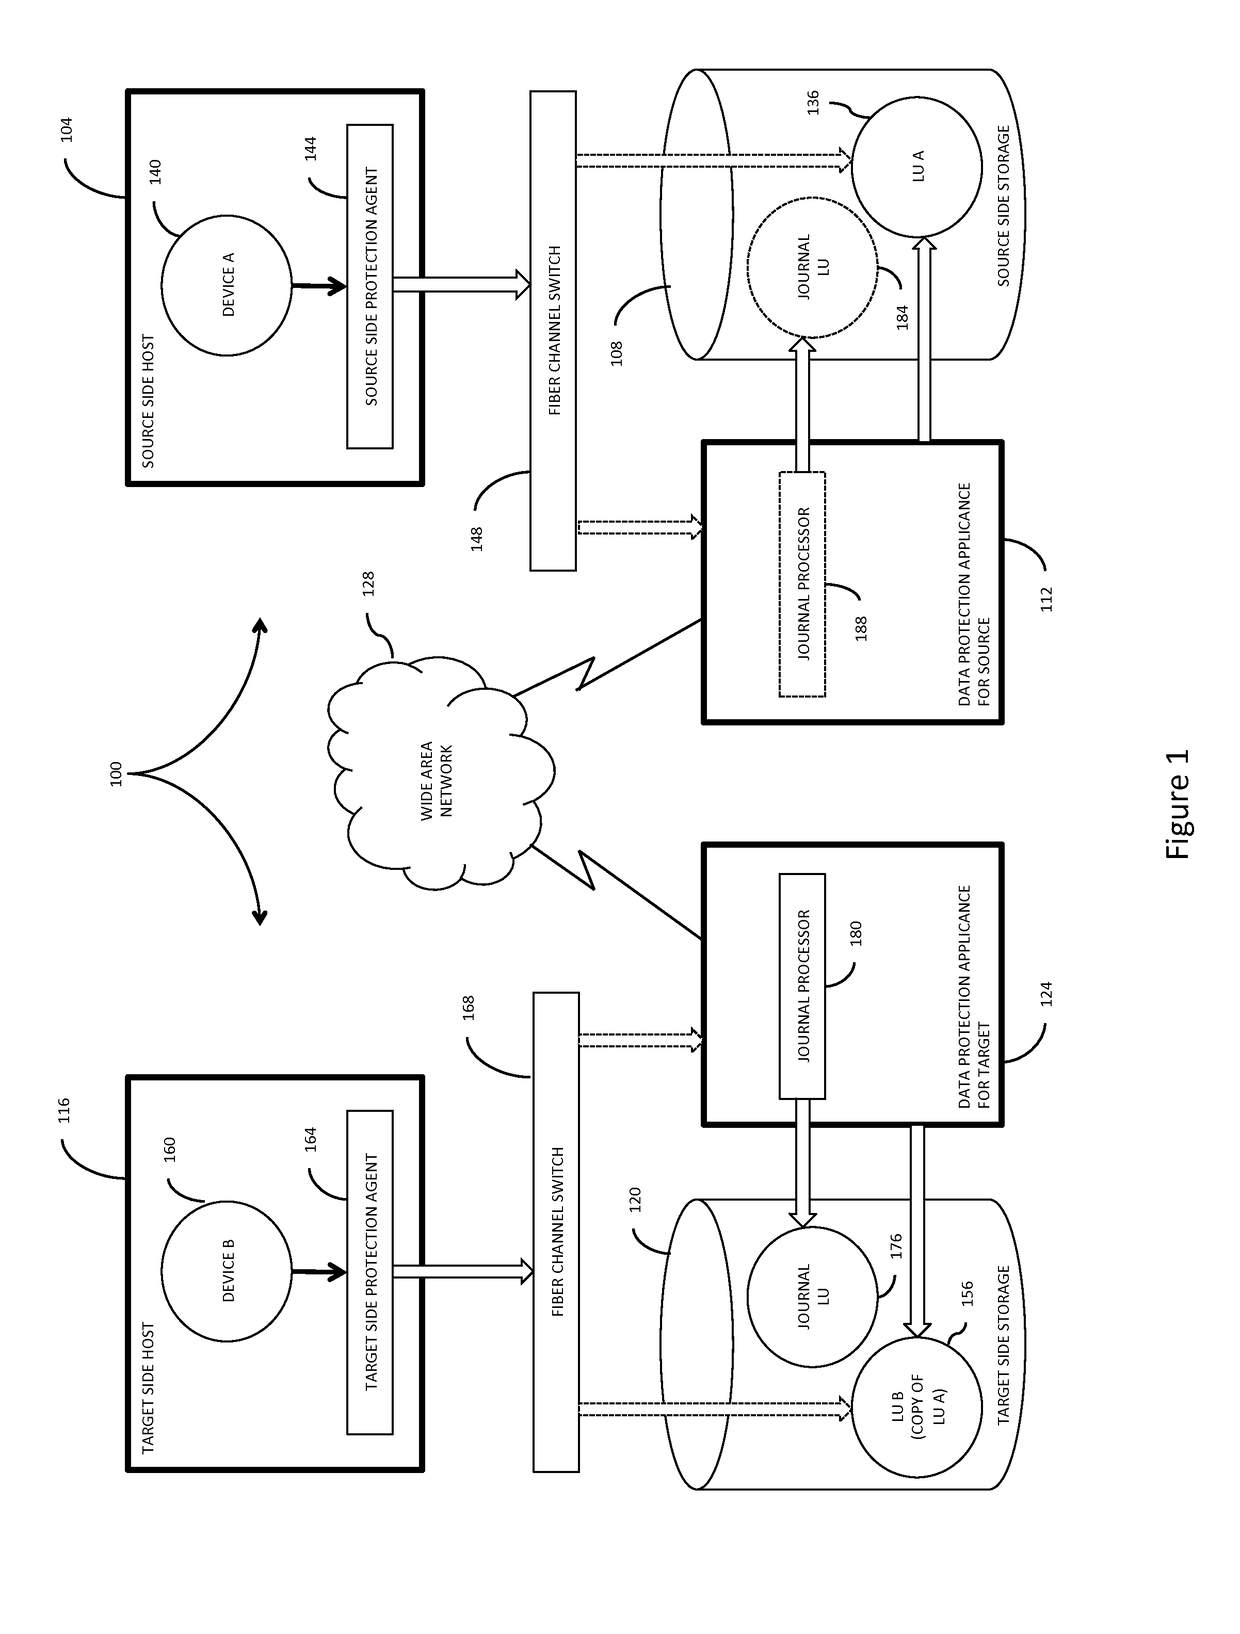 Alignment fixing on a data protection system during continuous data replication to deduplicated storage